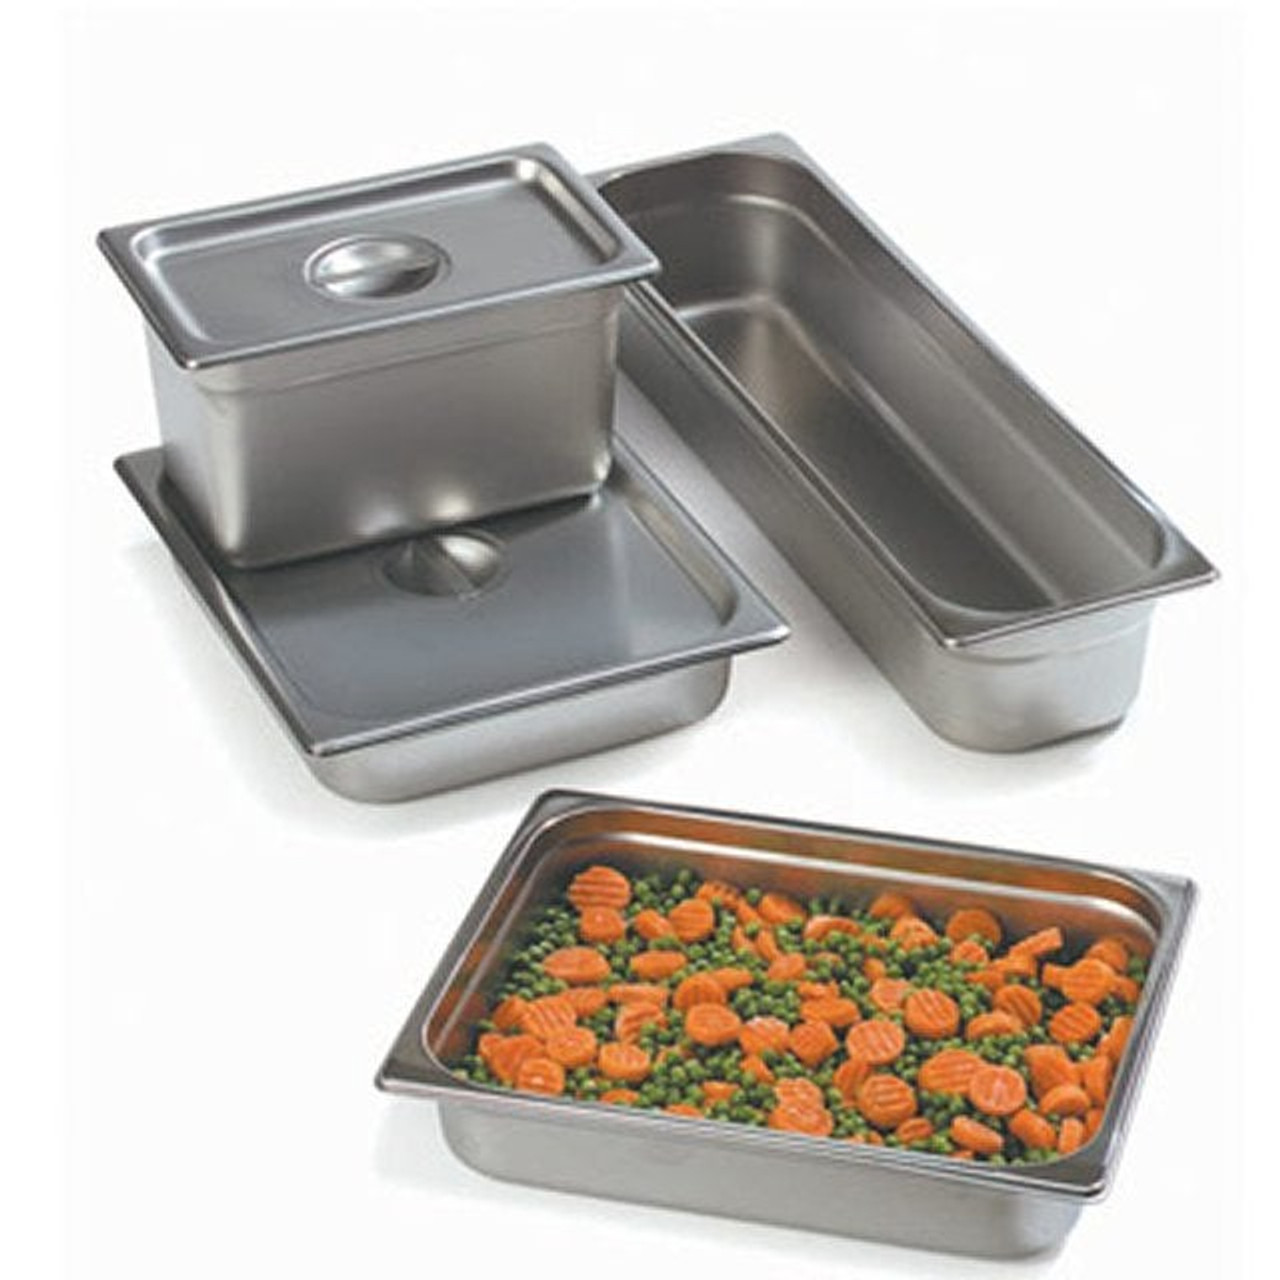 Magnum 6In Deep Stainless Steel 1/3 Size Economy Pan Inserts | 1UN/Unit, 6 Units/Case